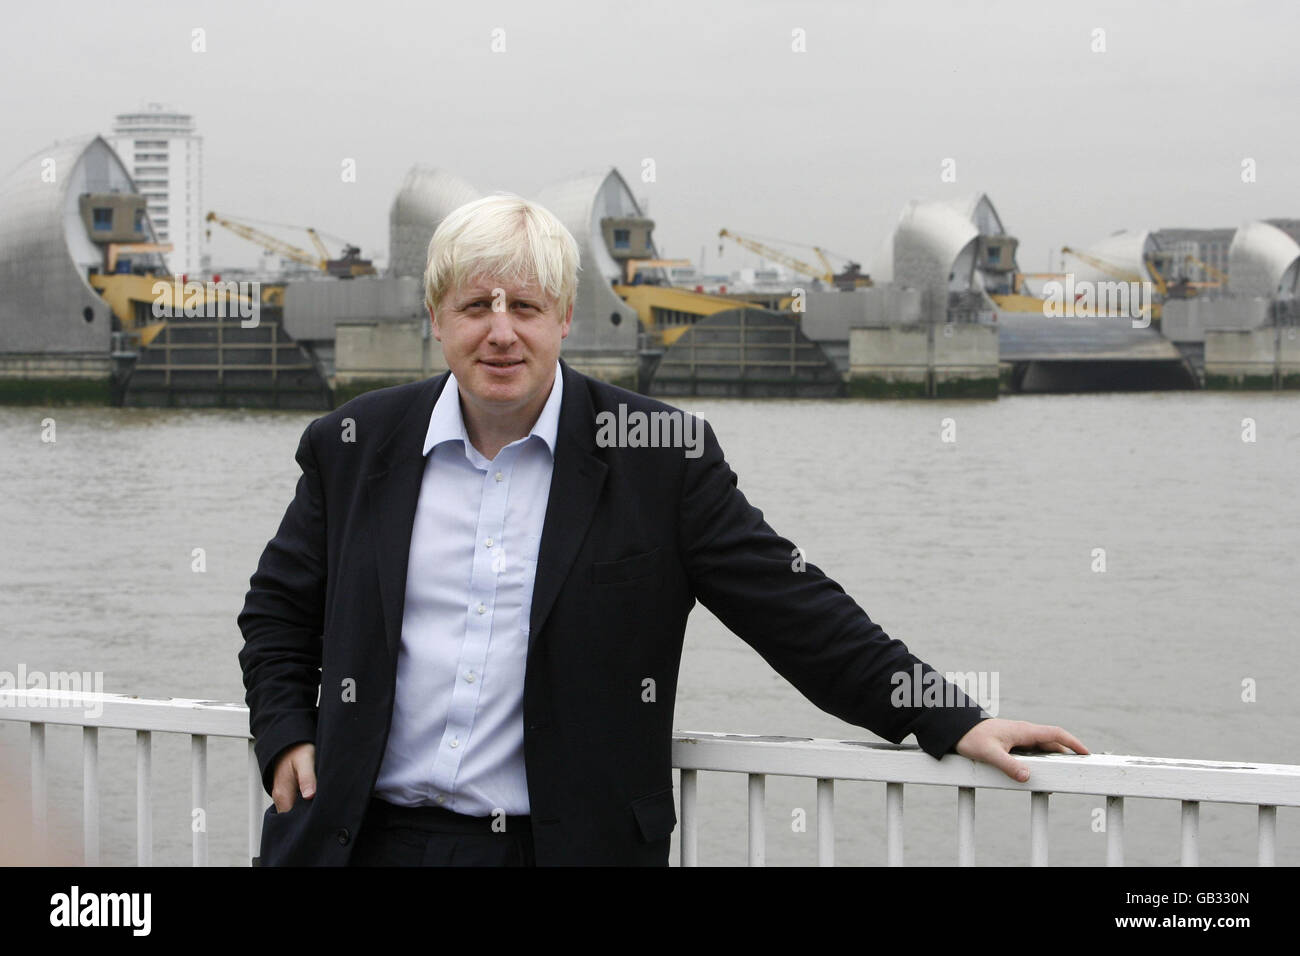 The Mayor of London Boris Johnson launches London's Climate Change Adaptation Strategy by the Thames Barrier in east London. Stock Photo